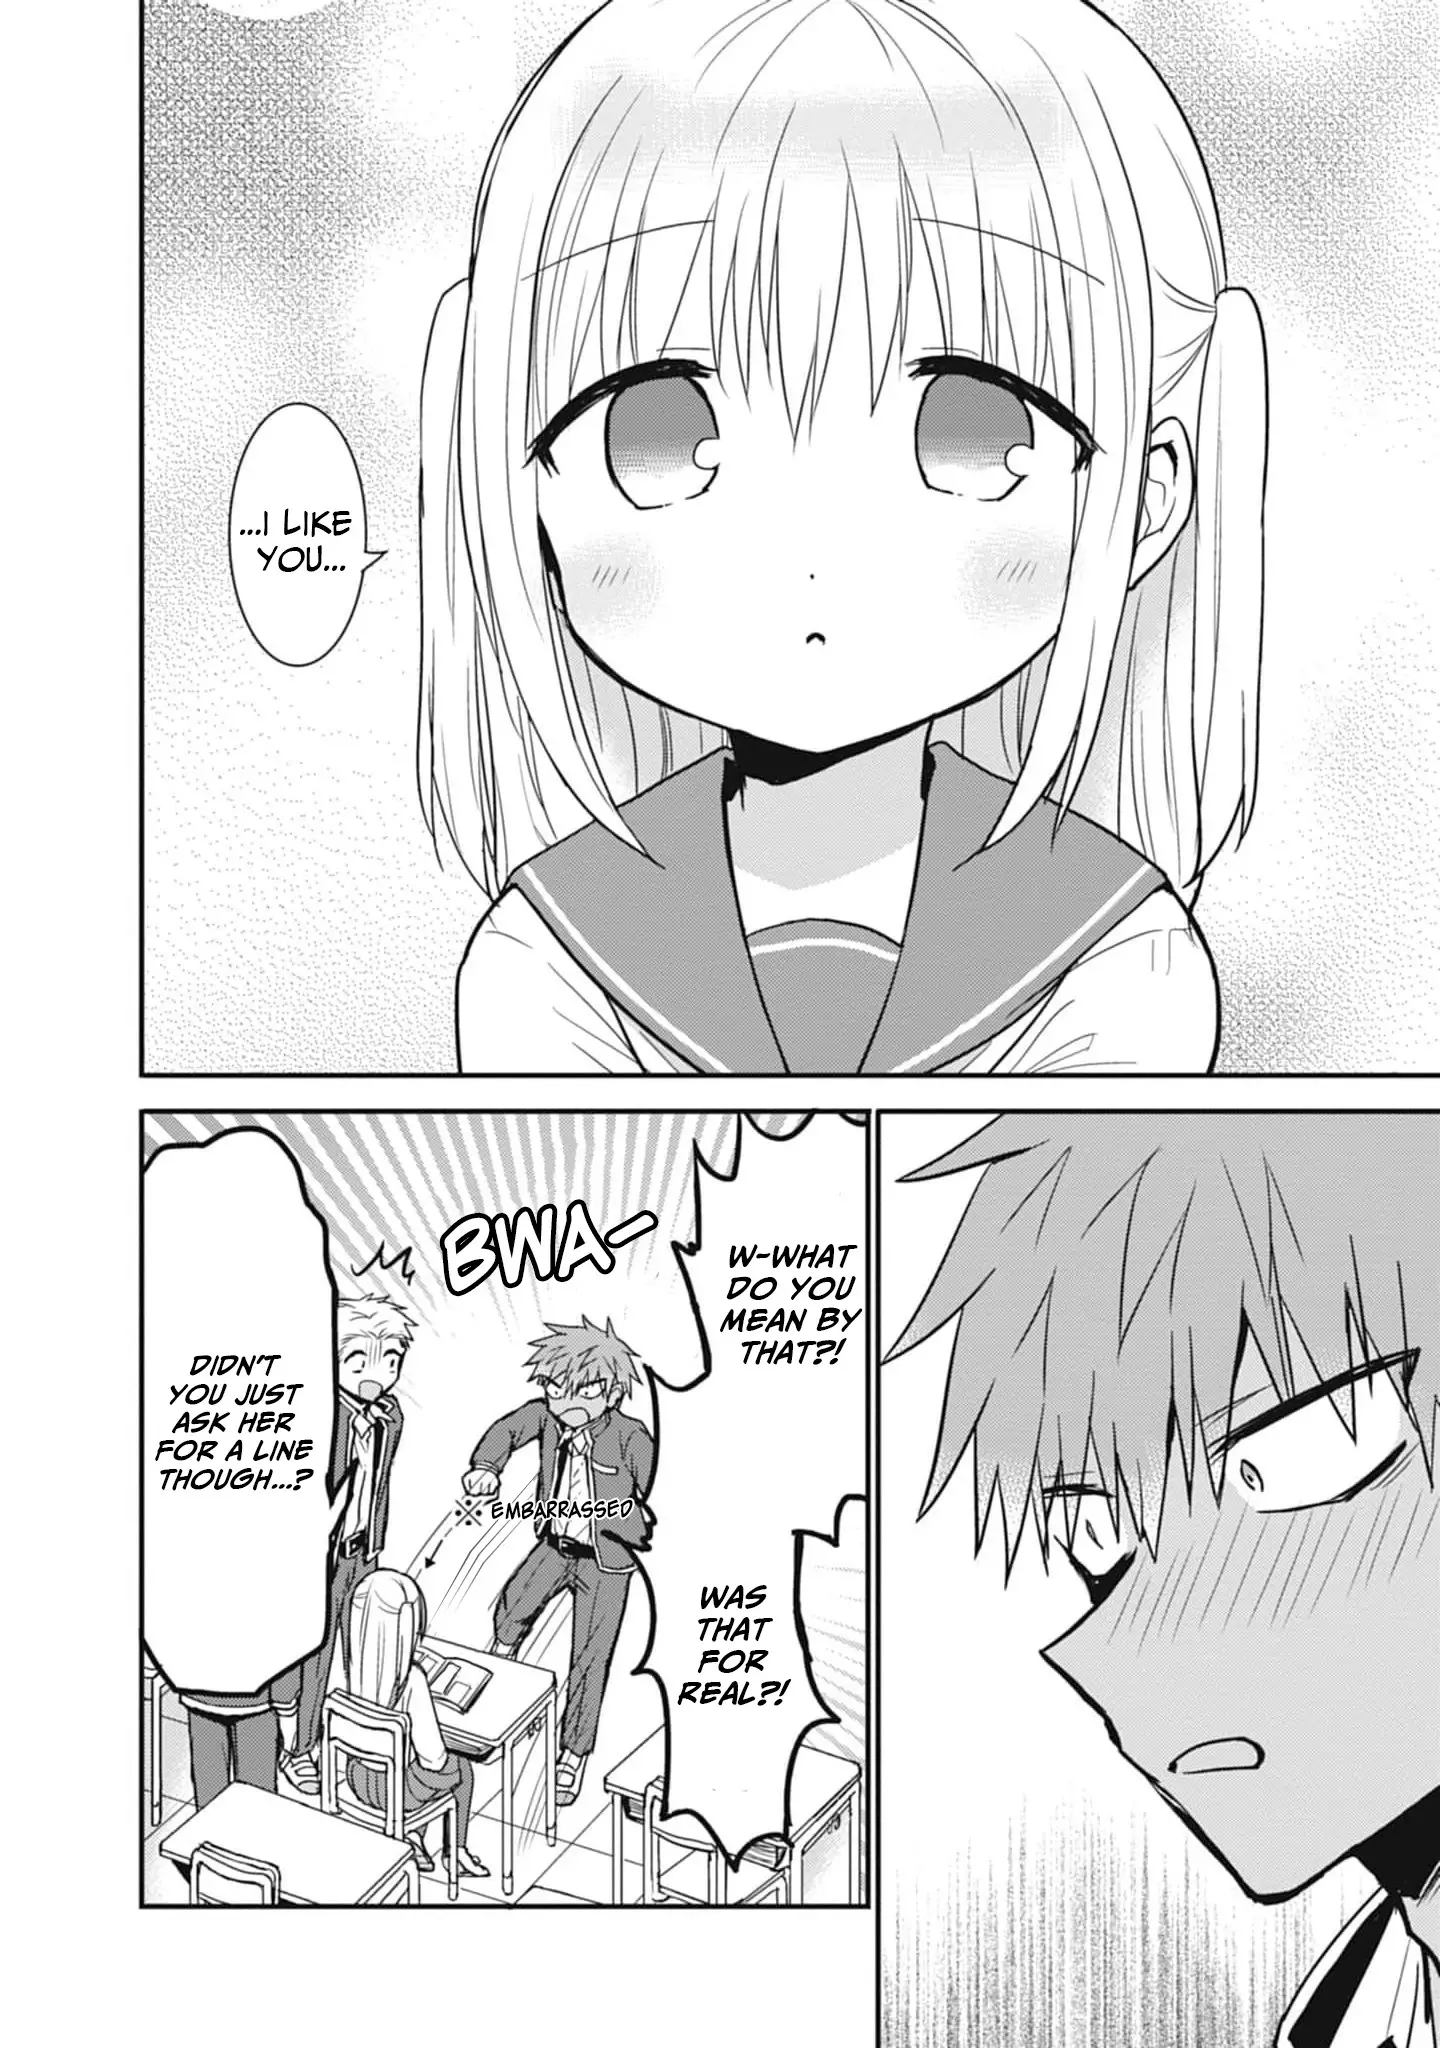 Expressionless Face Girl And Emotional Face Boy - 79 page 7-56e527c8